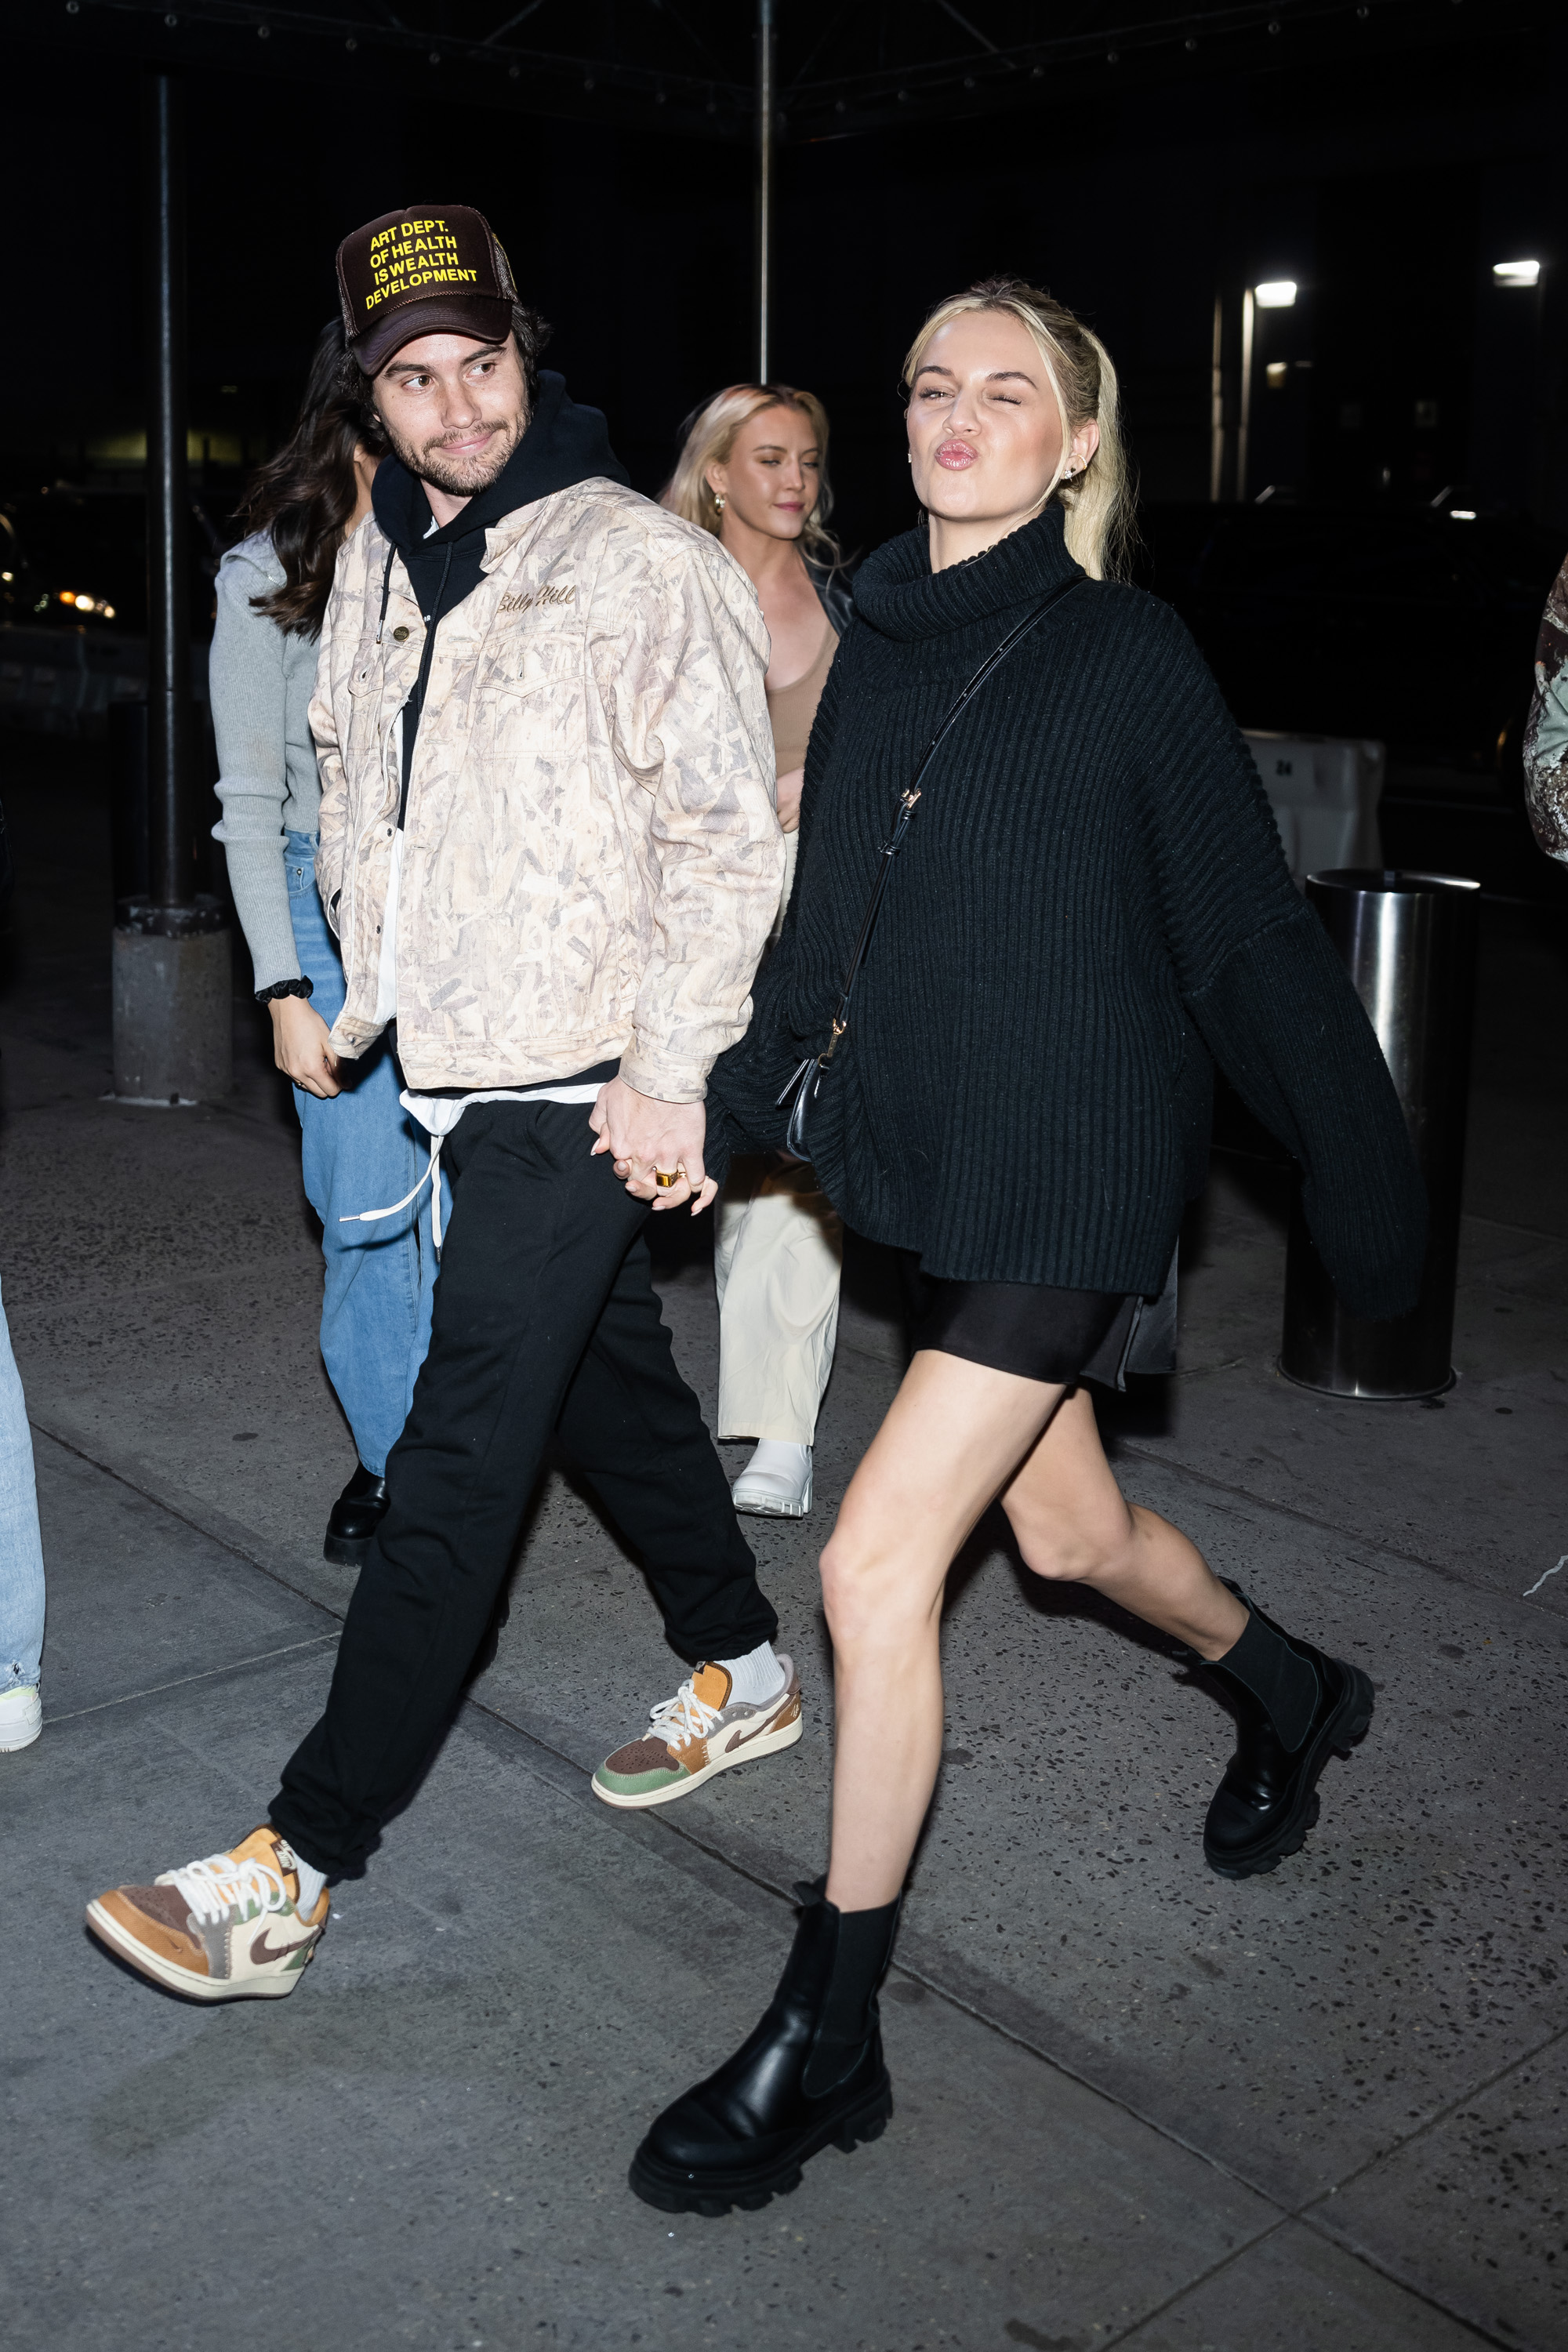 Chase Stokes (L) and Kelsea Ballerini are seen in Midtown on March 5, 2023, in New York City. | Source: Getty Images